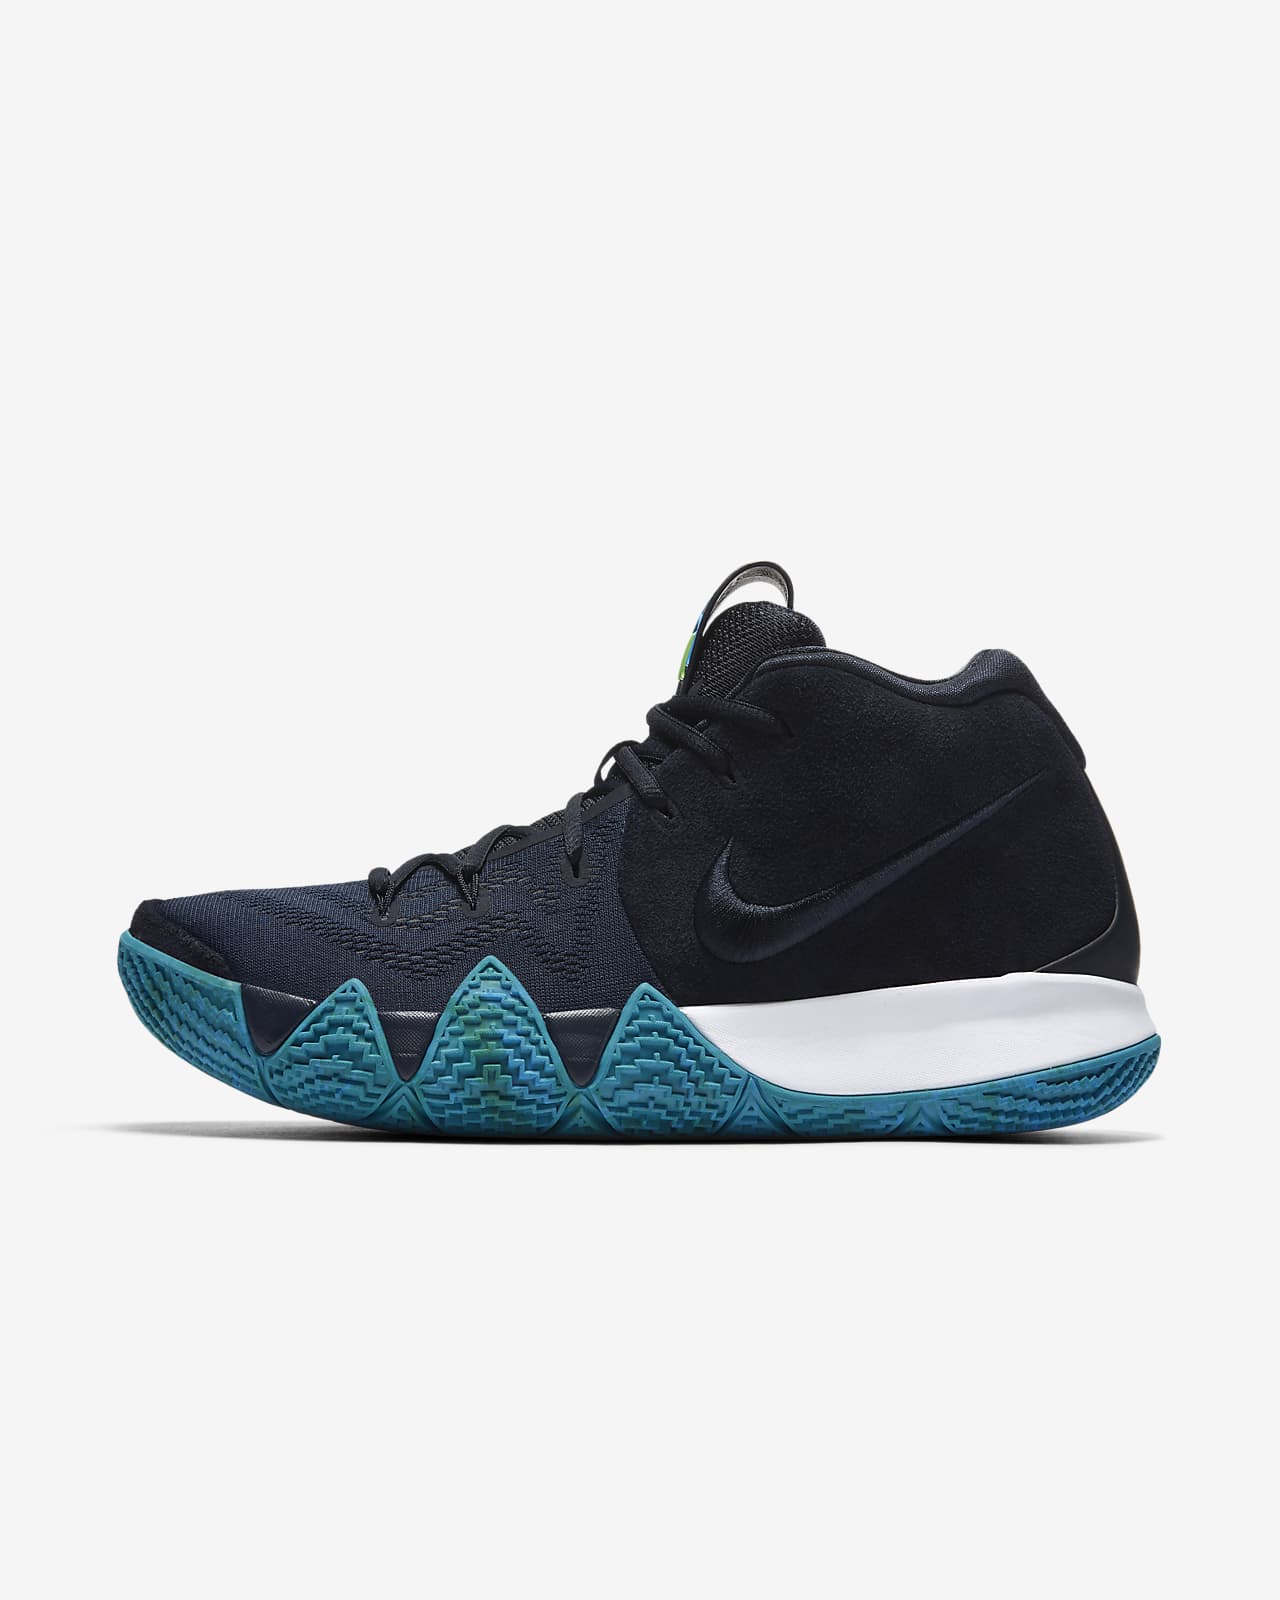 kyrie 4 turquoise